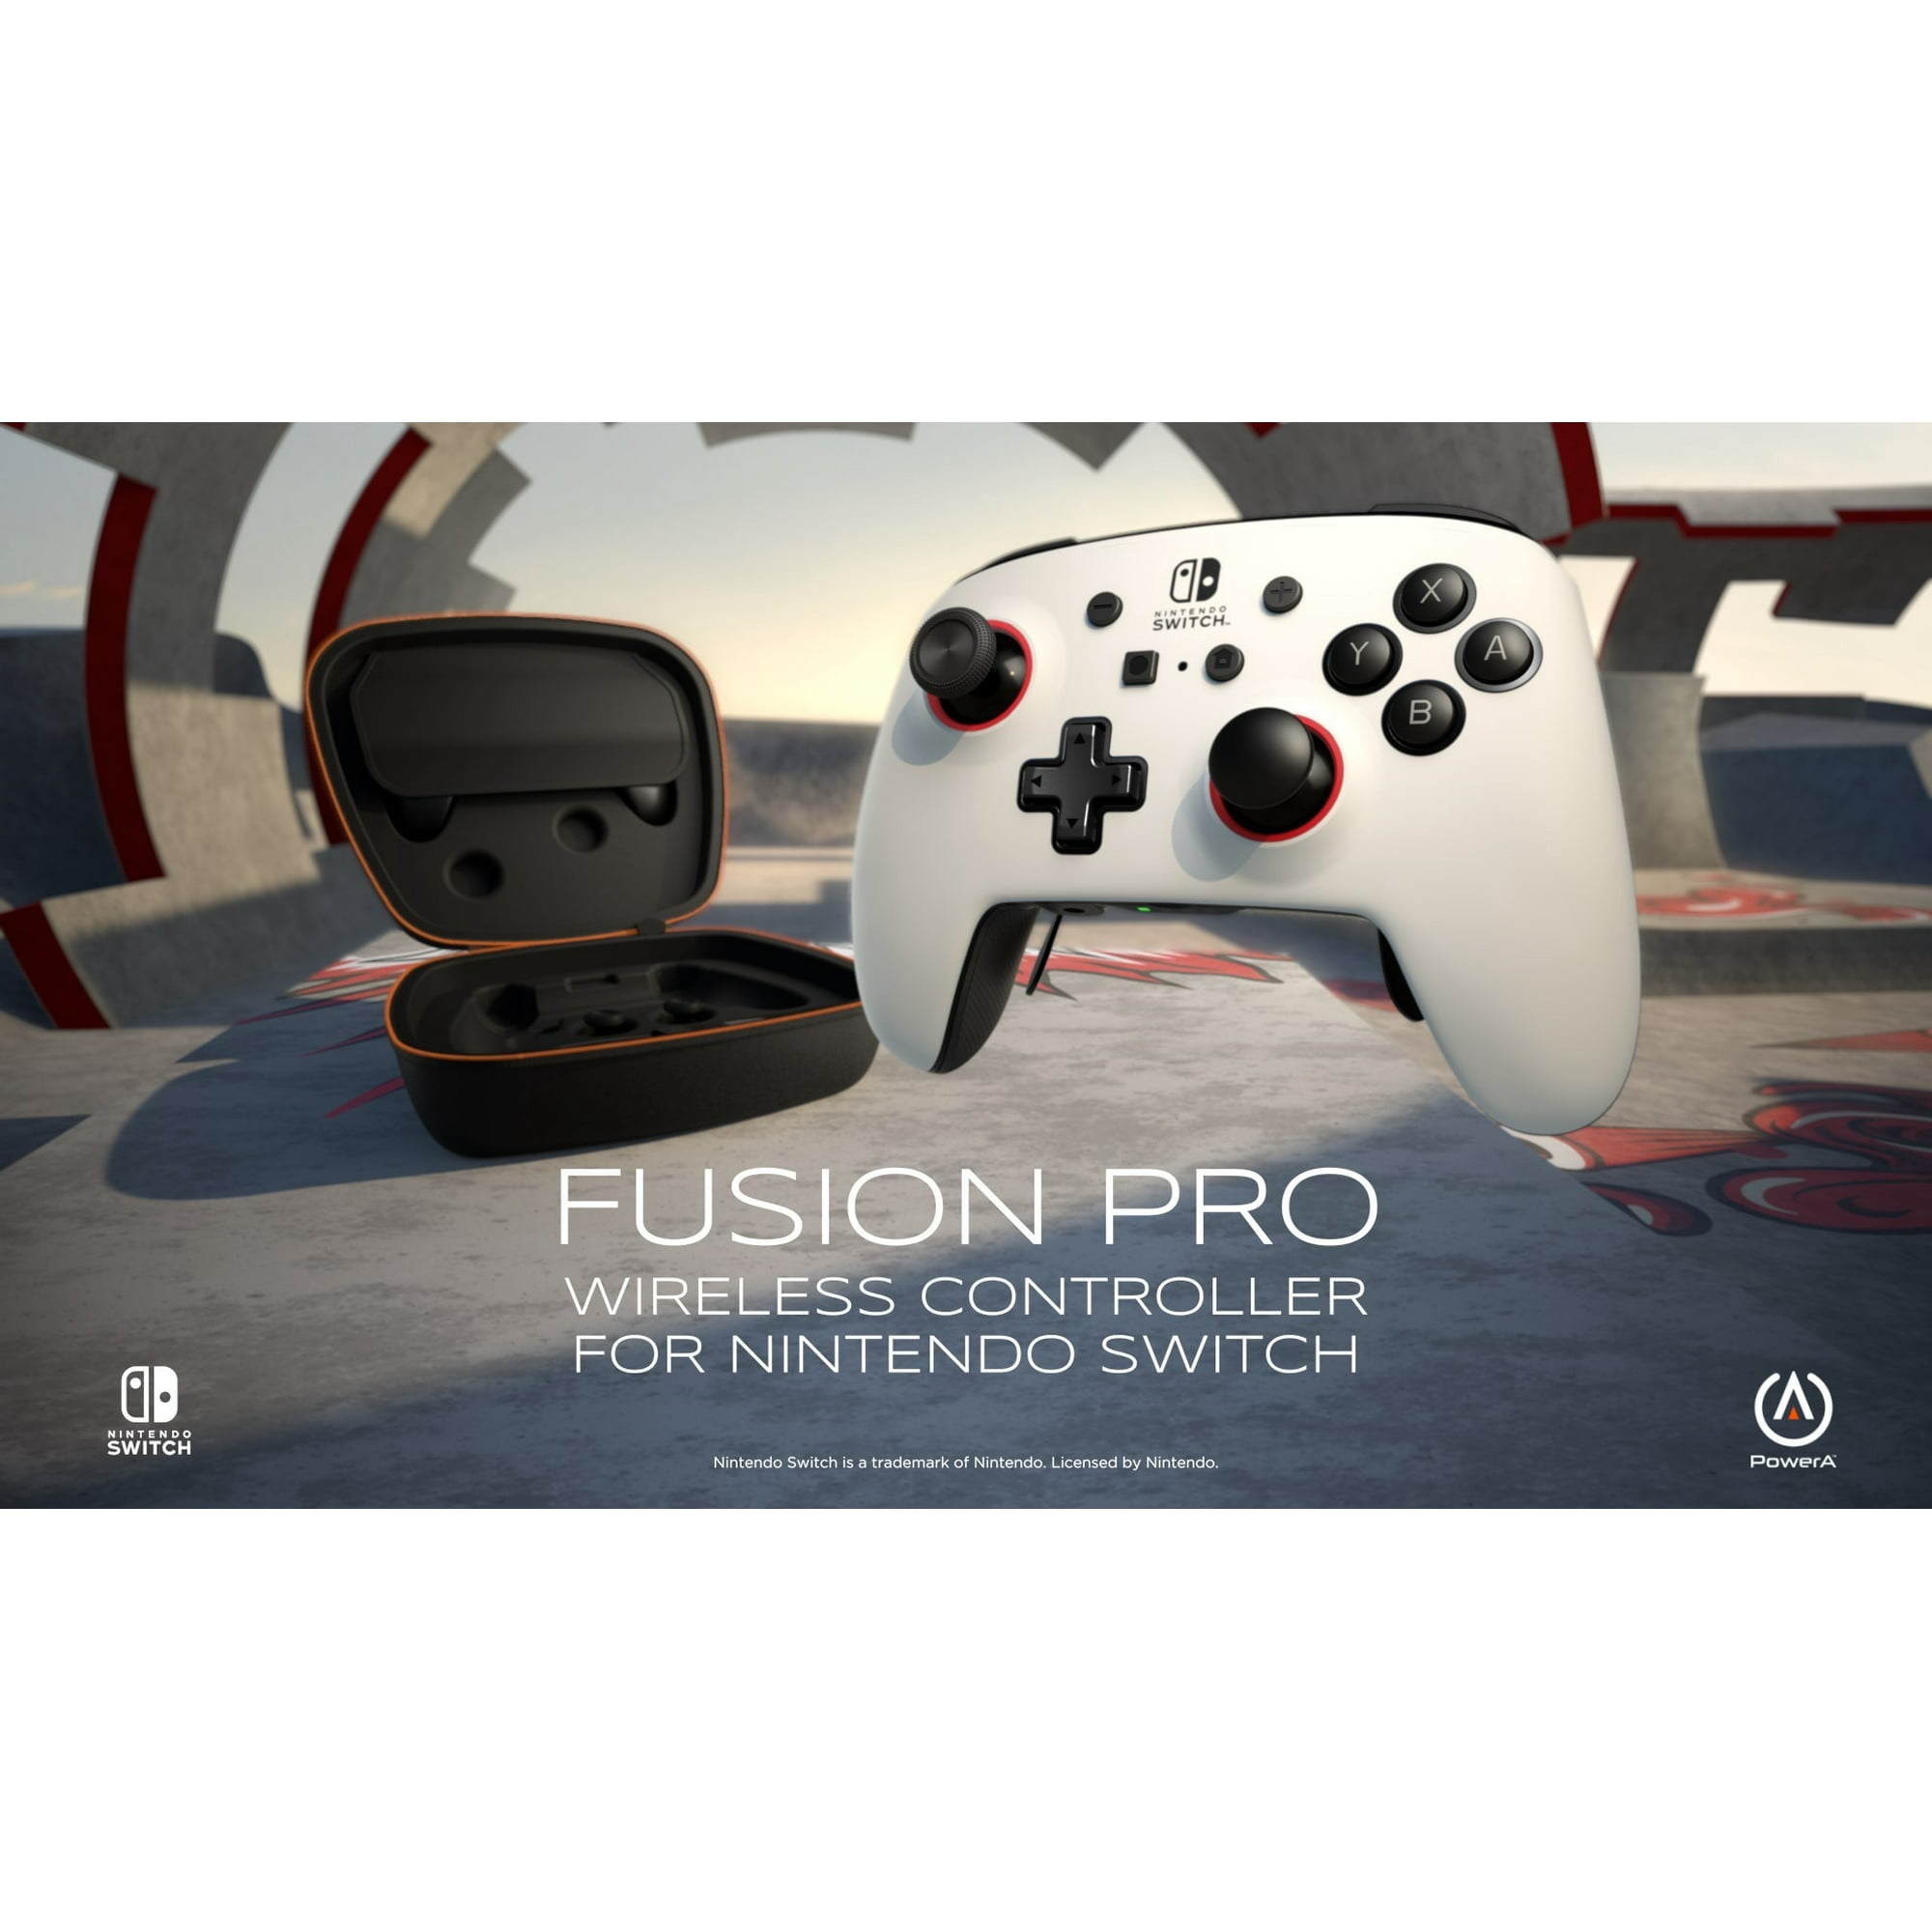 PowerA - FUSION Pro Wireless Controller for Nintendo Switch - White/Black  With Cleaning Manual Kit Bolt Axtion Bundle Used - Walmart.com